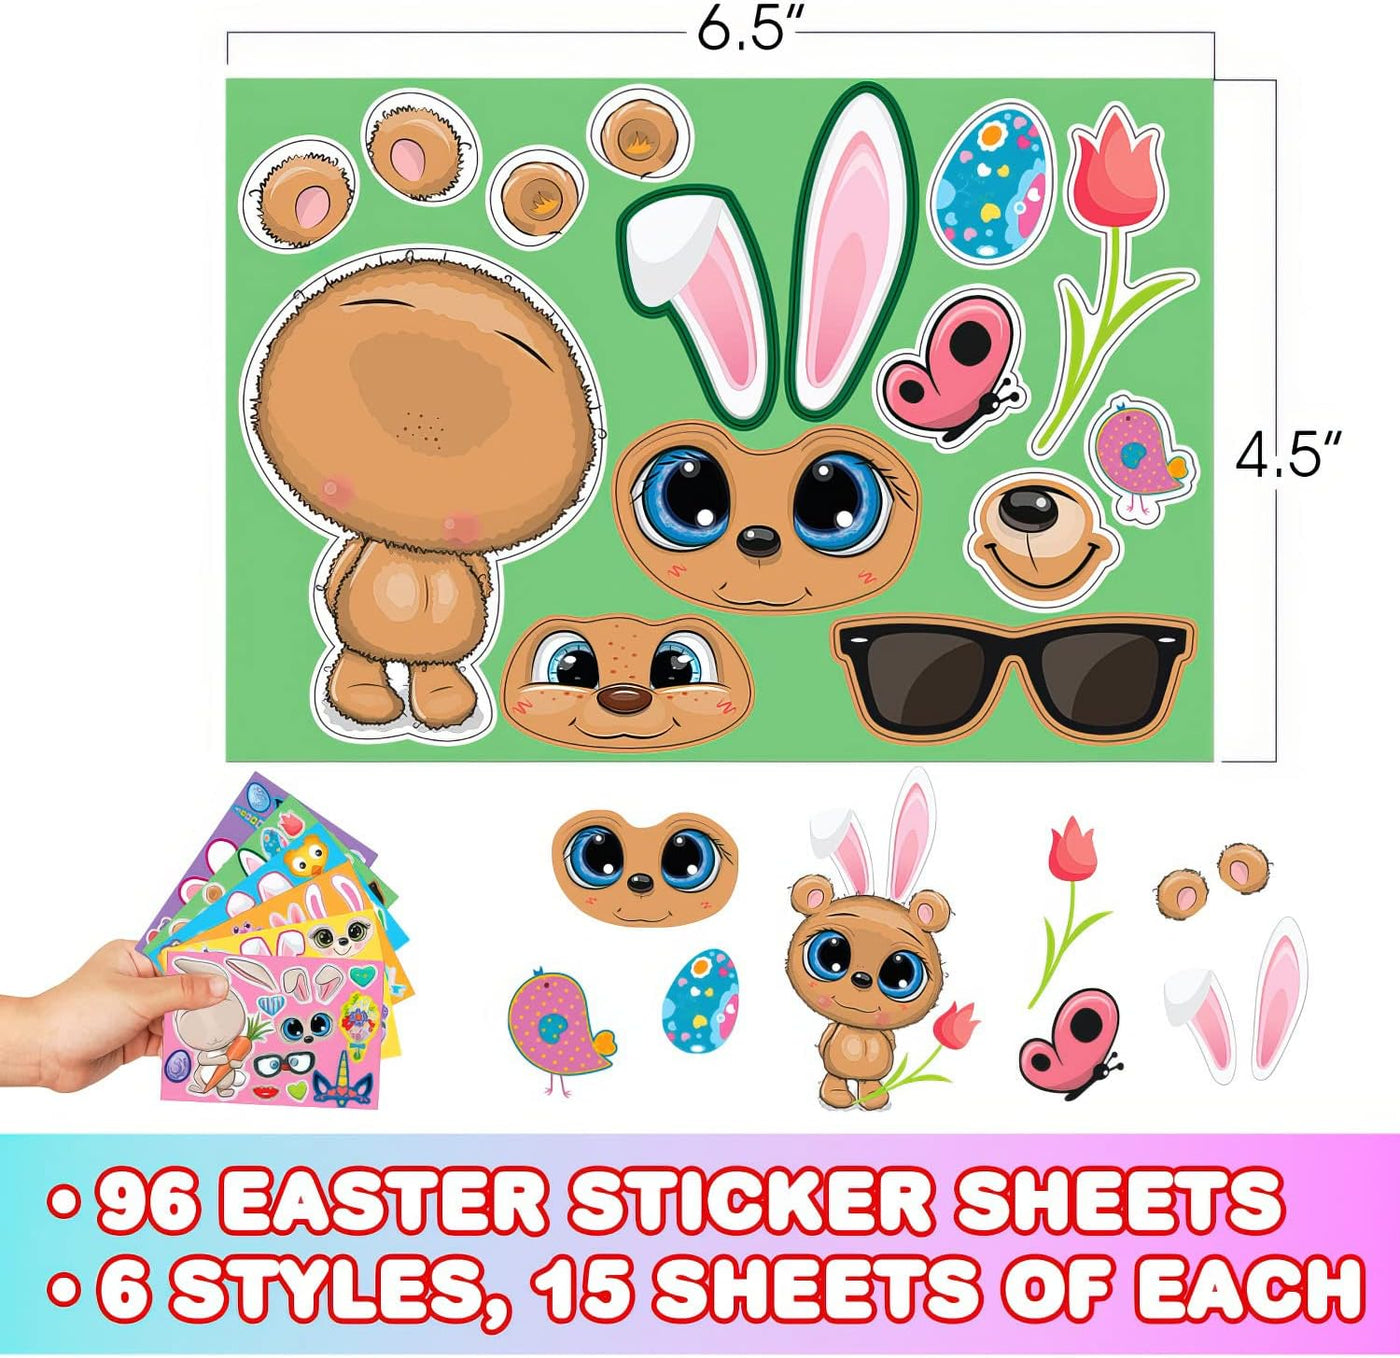 Artcreativity Easter Make Your Own Stickers, Bulk Easter Stickers for Kids (96 Sticker Sheets) with 6 Designs, Easter Basket Stuffers, Easter Egg Stickers and Bunny Stickers, Easter Crafts for Kids